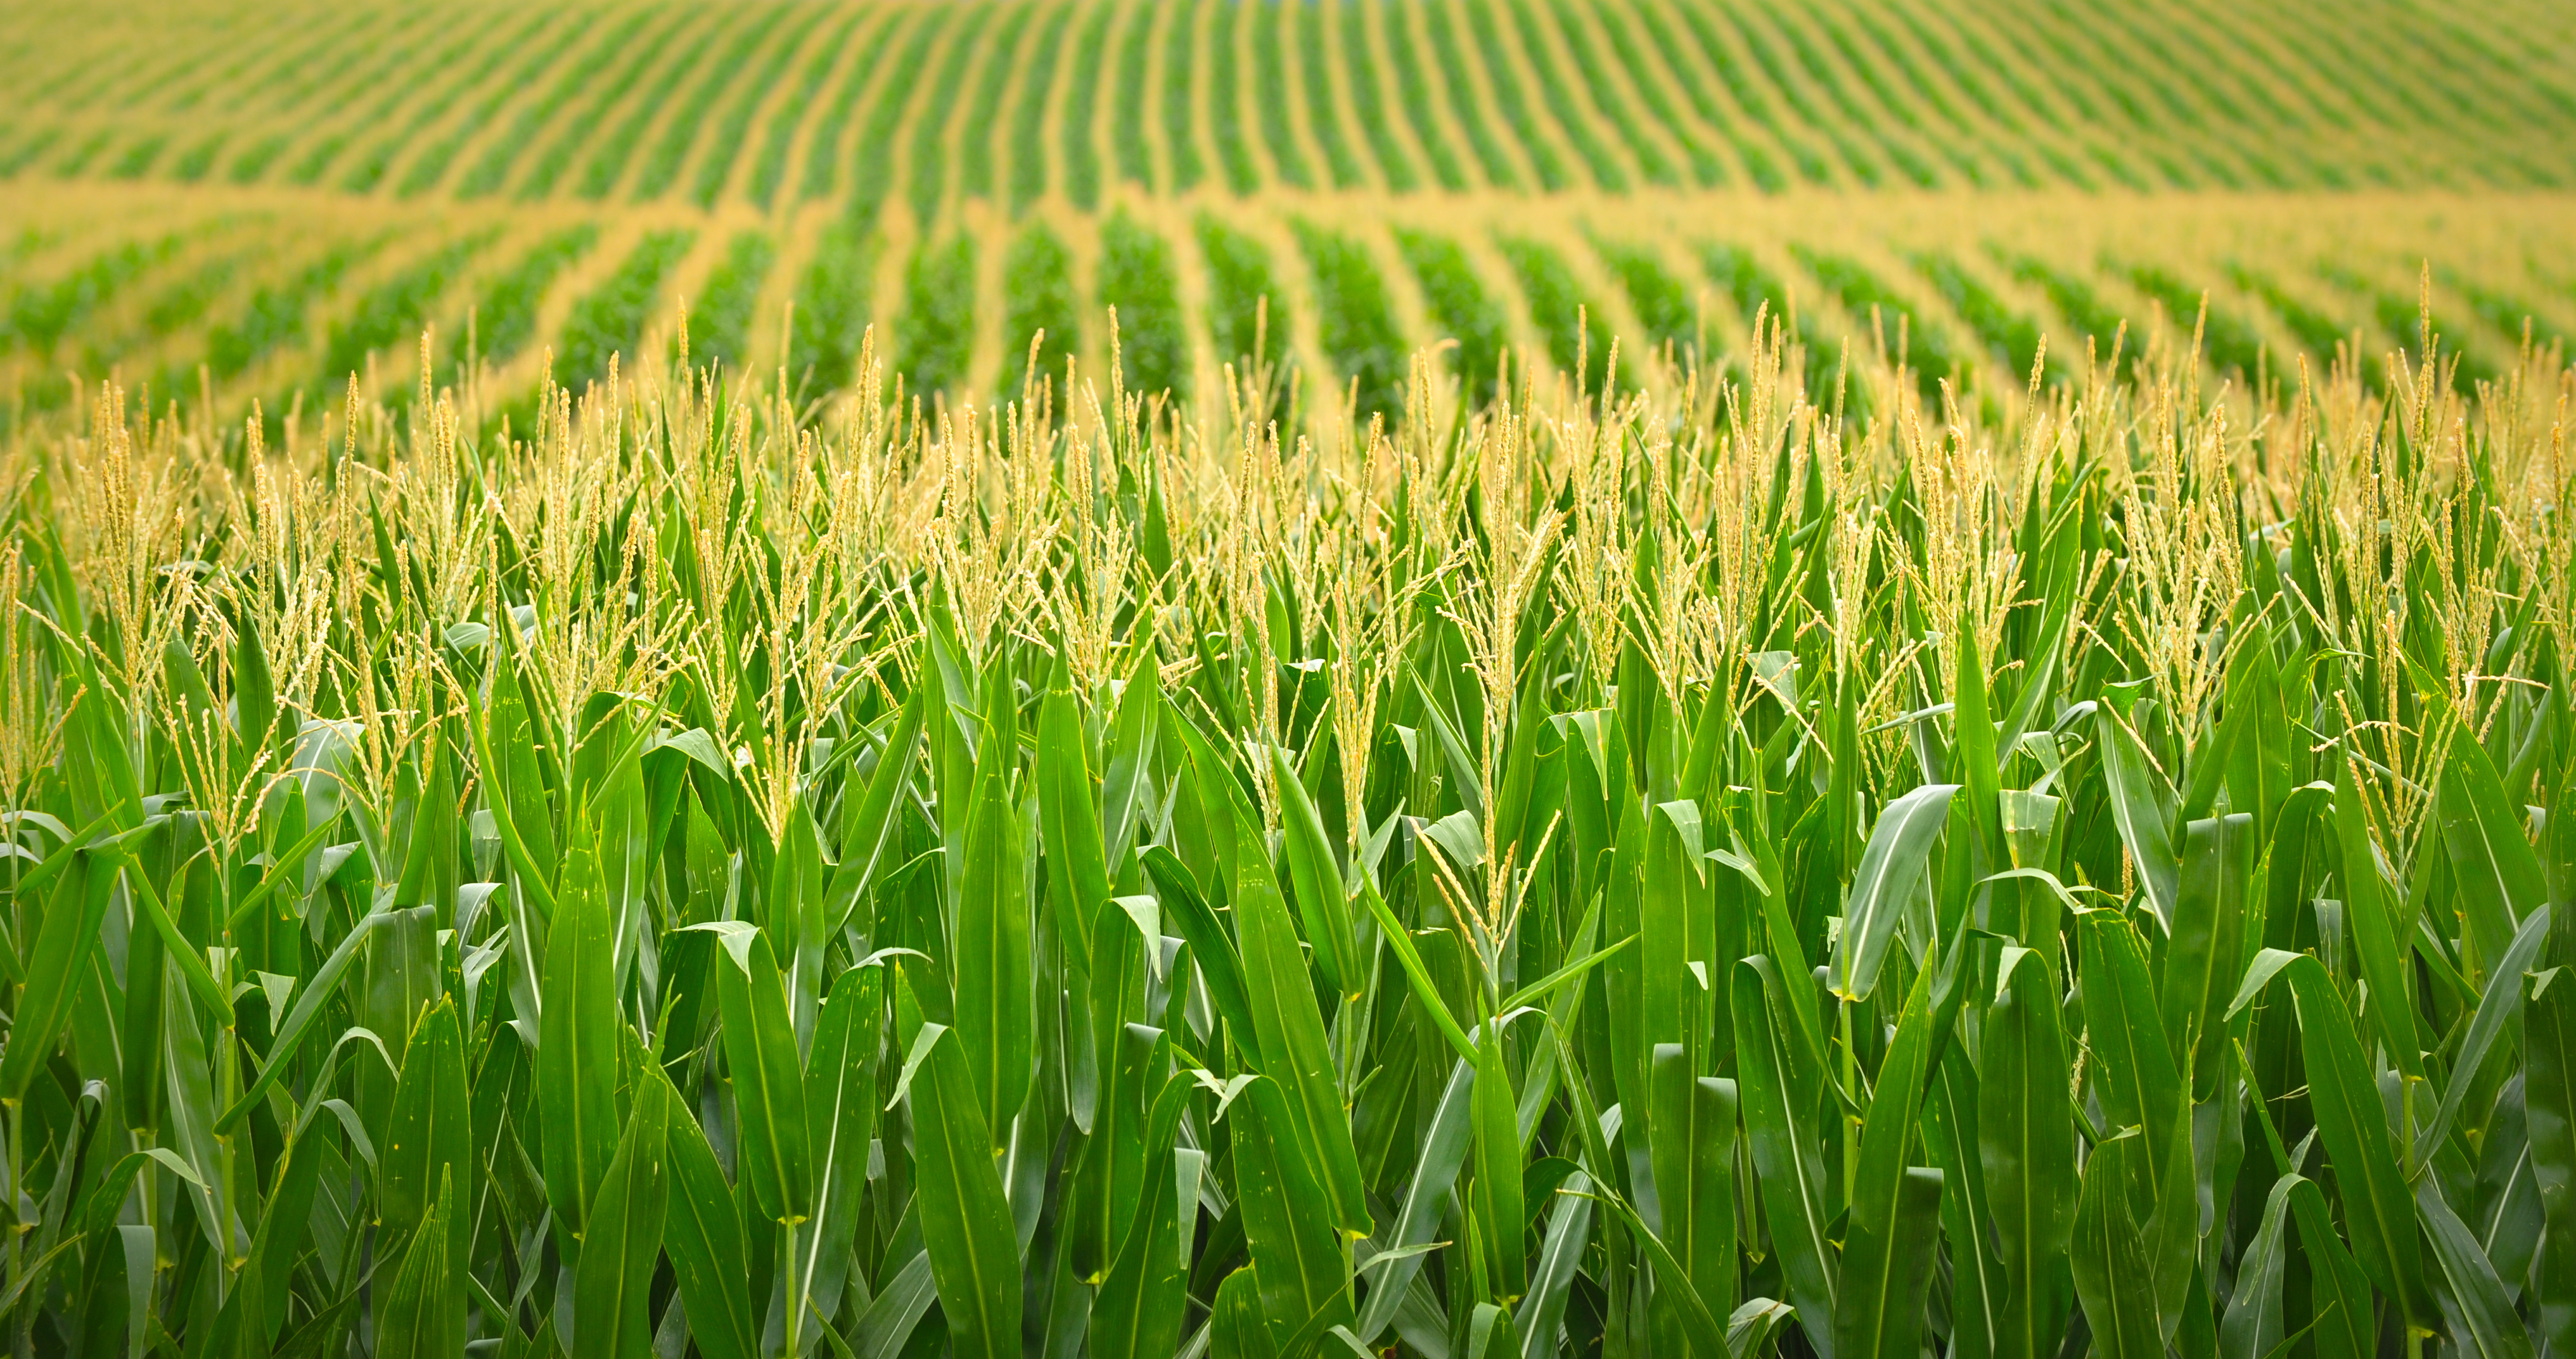 Three Scientists Weigh in on the Future of Agriculture ...